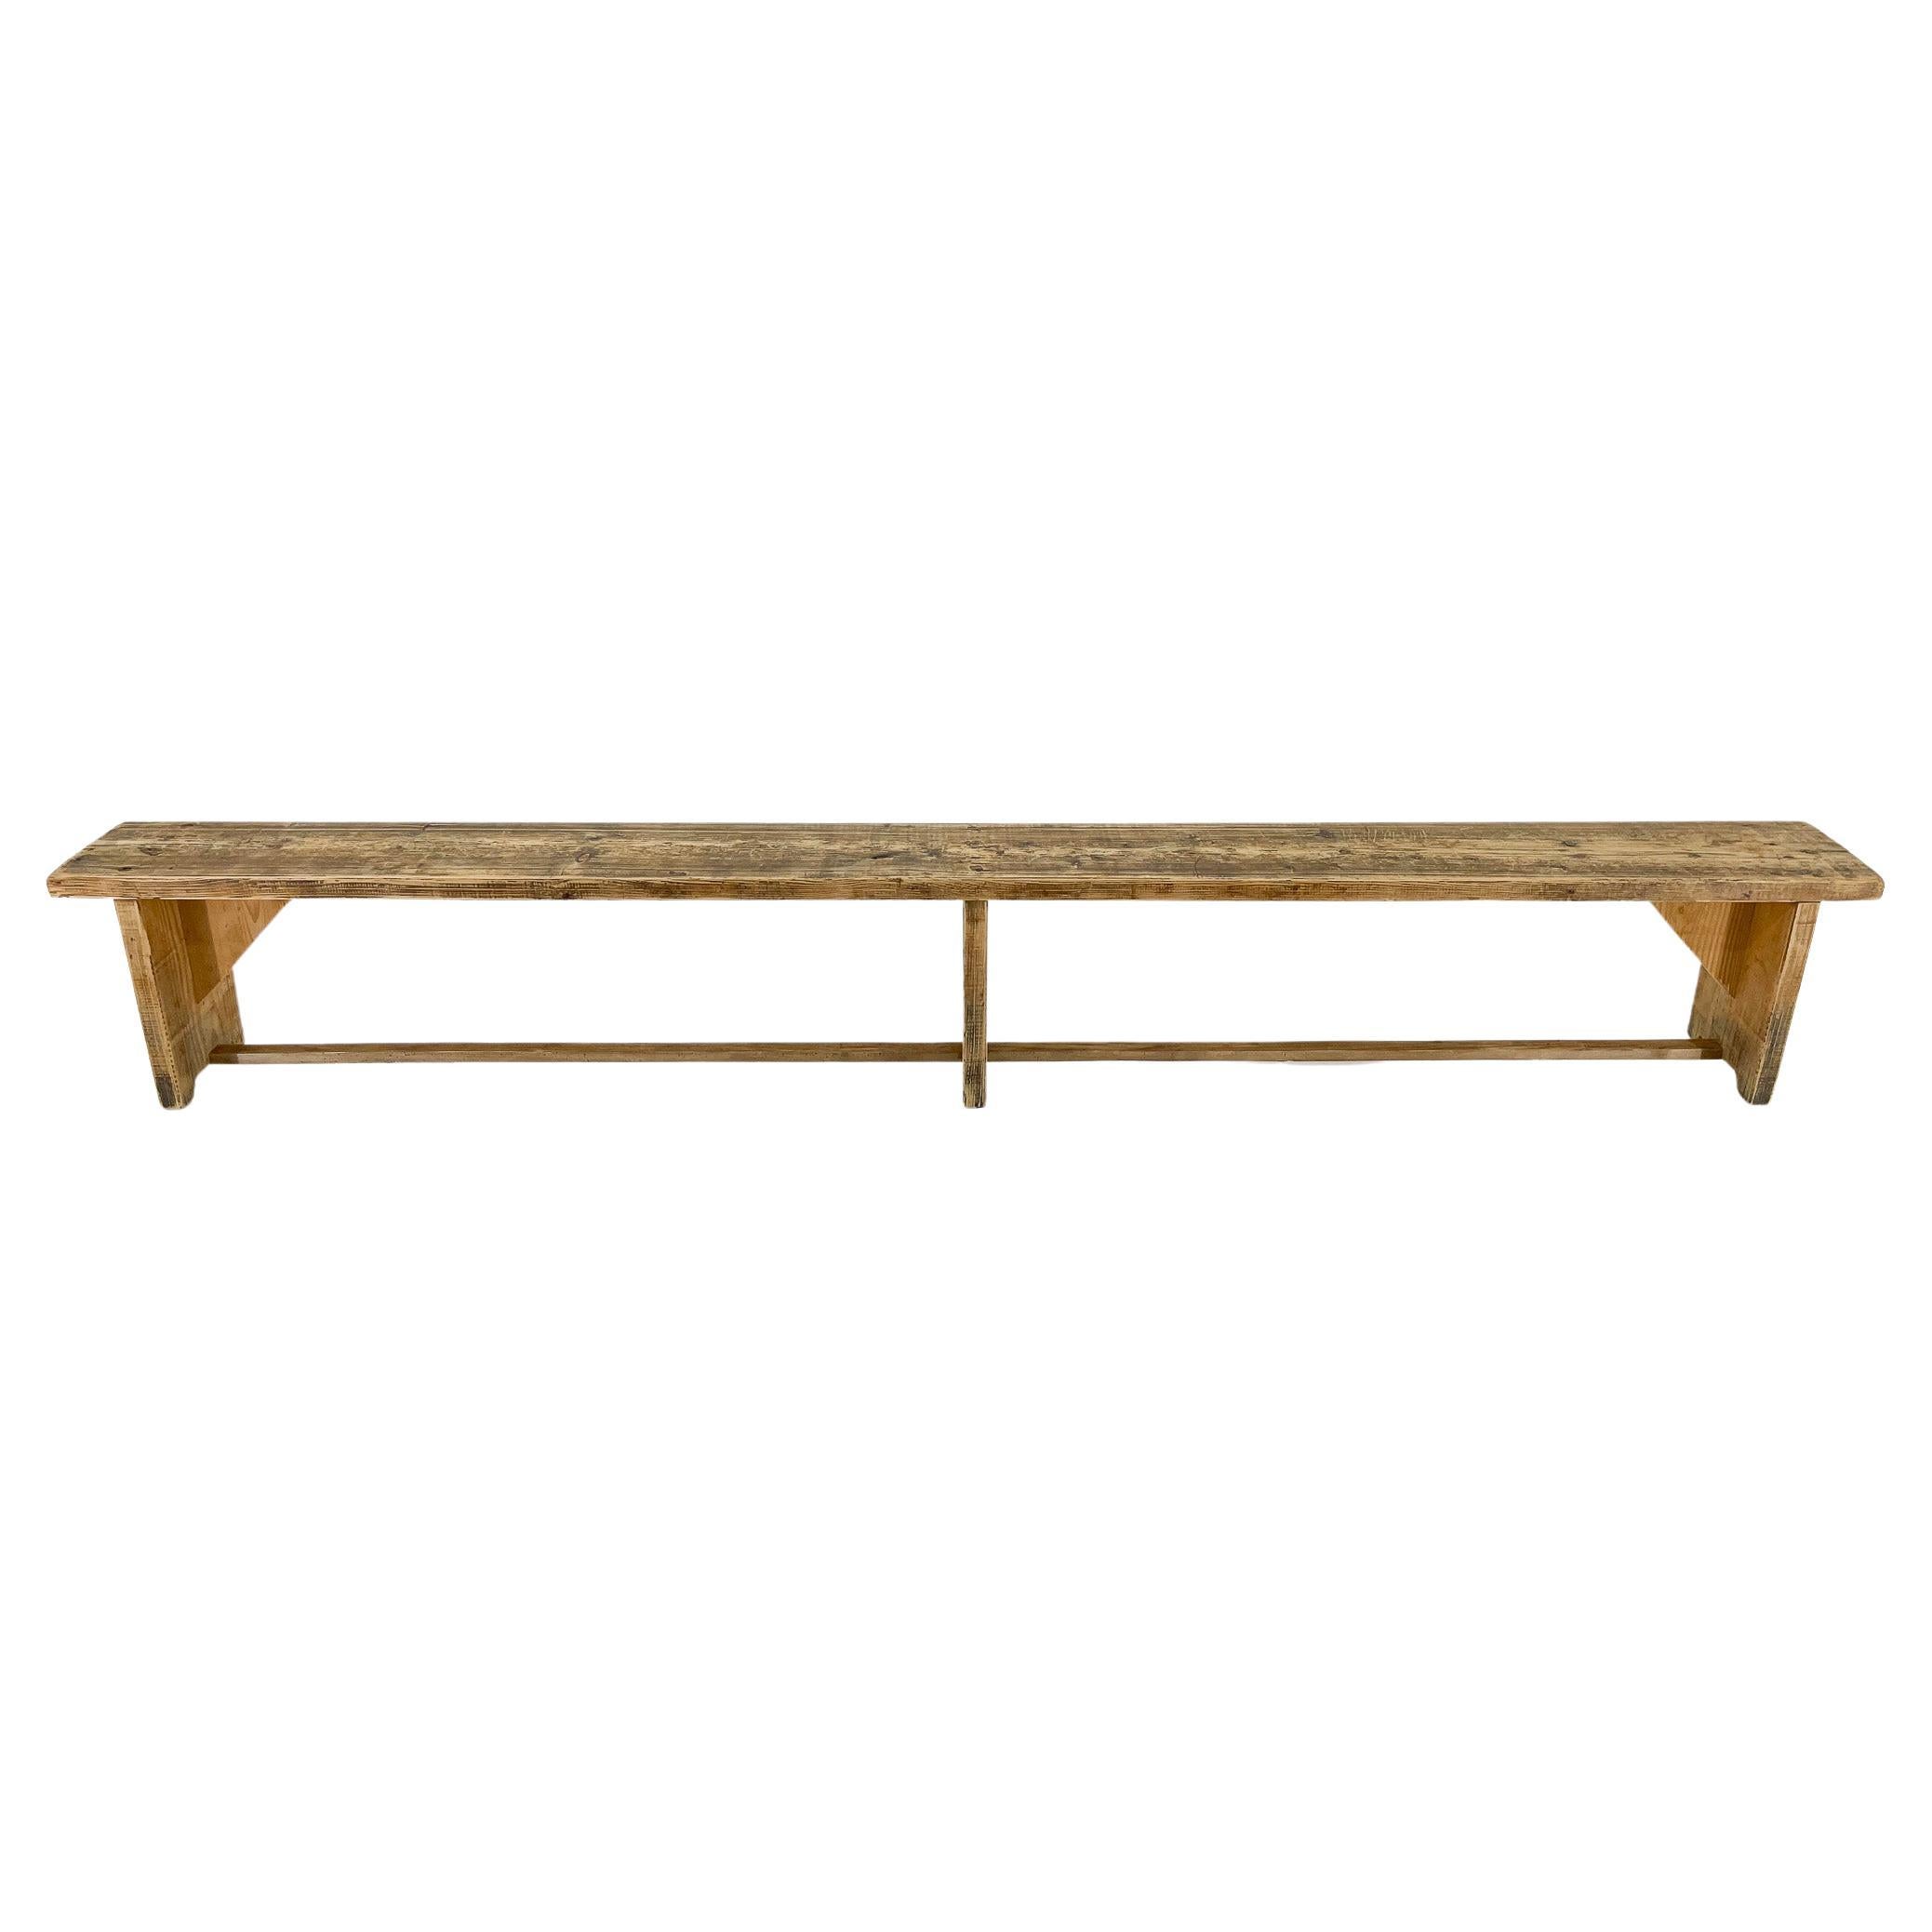 Vintage Long Wooden Bench, 1950s For Sale